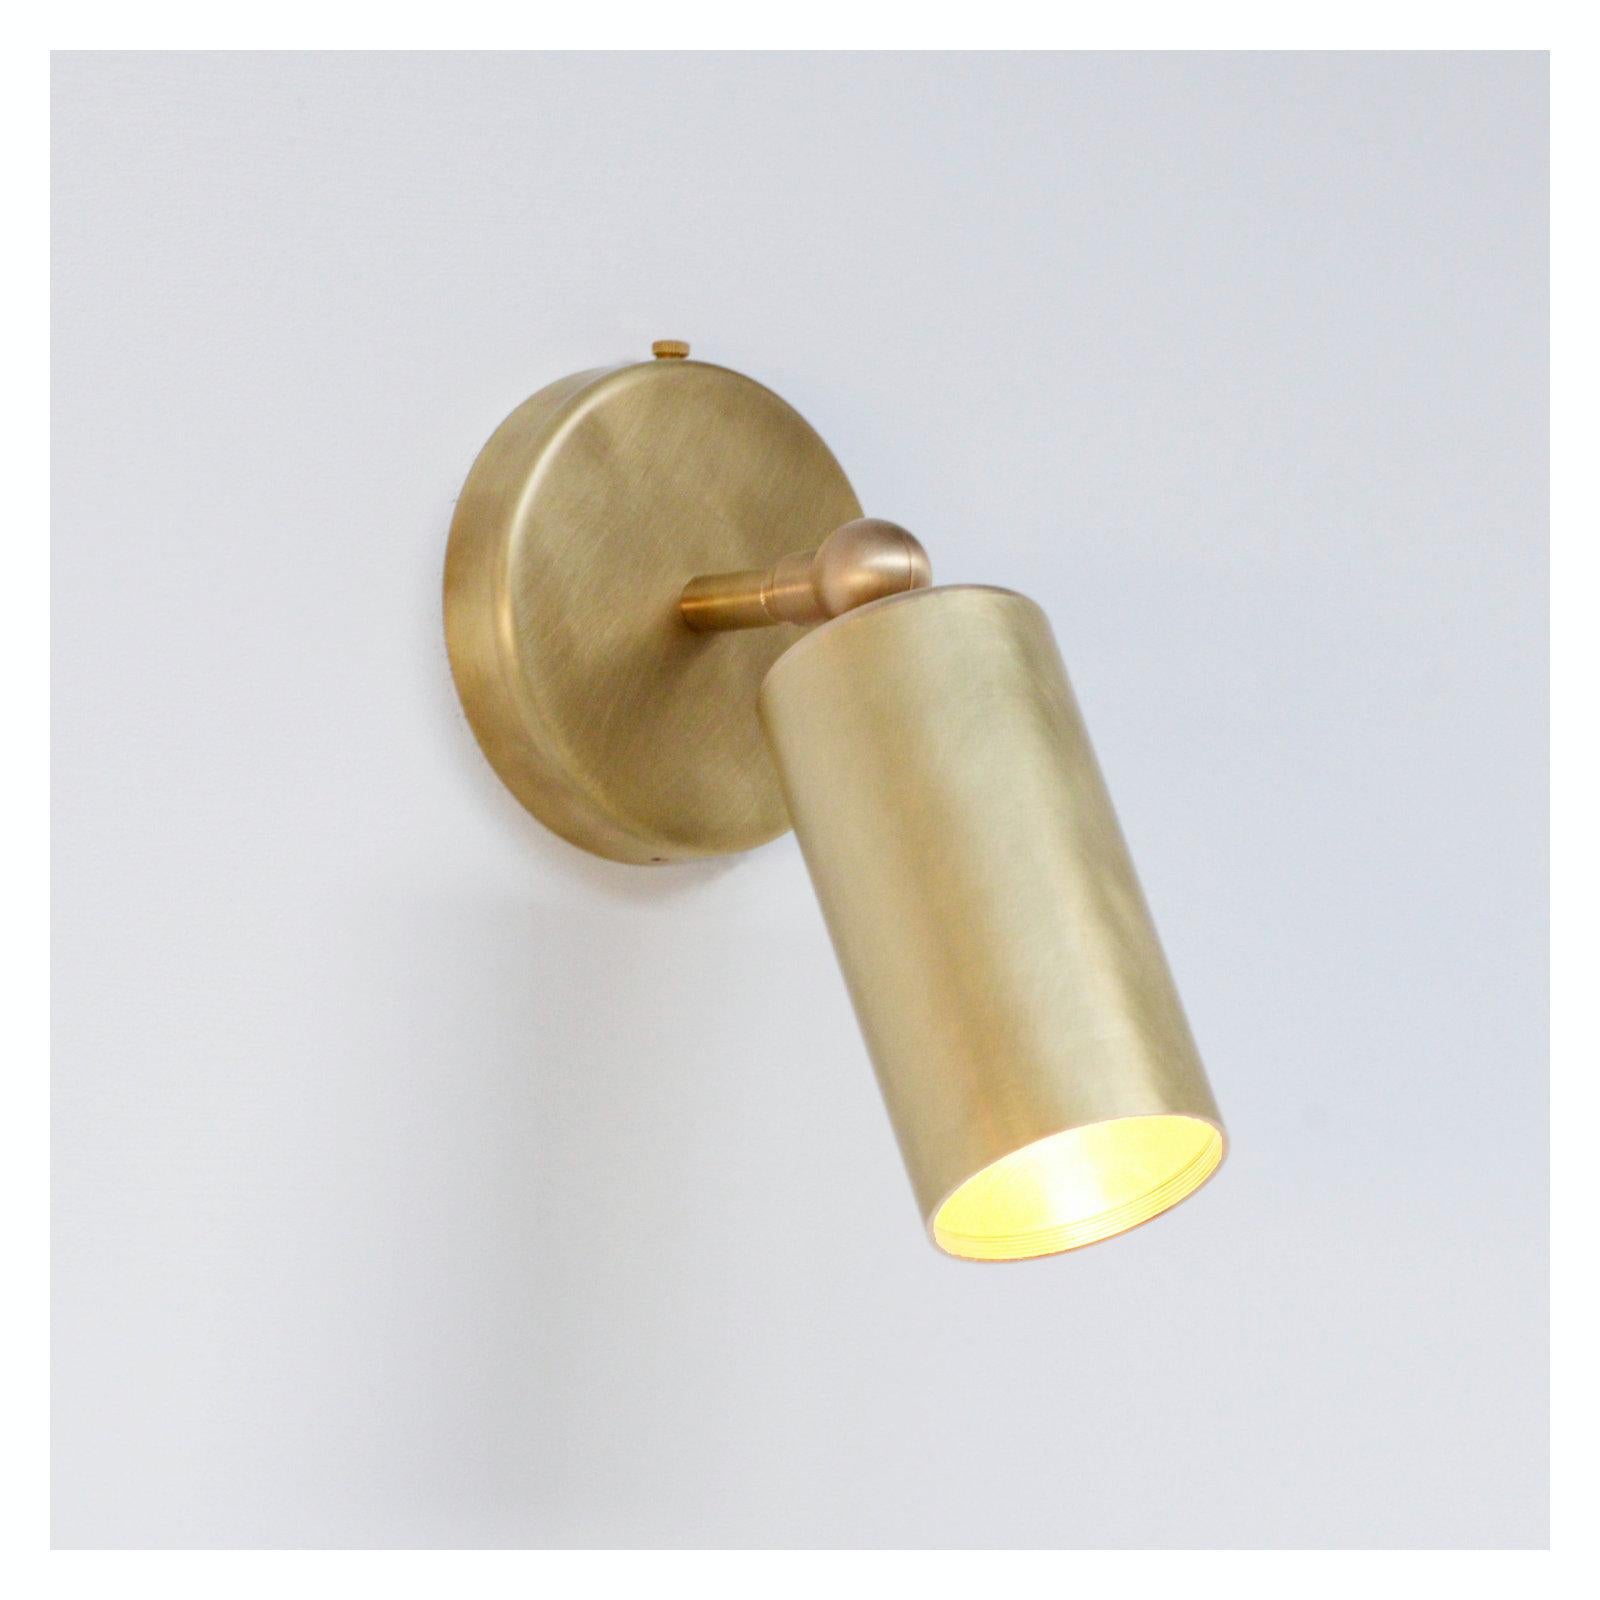 The Videre wall light has been designed to provide functional task illumination, from an exquisitely hand-burnished wall light.

The tiltable body is perfect for illuminating bedsides, artwork and hallways.

The Videre wall light features: •